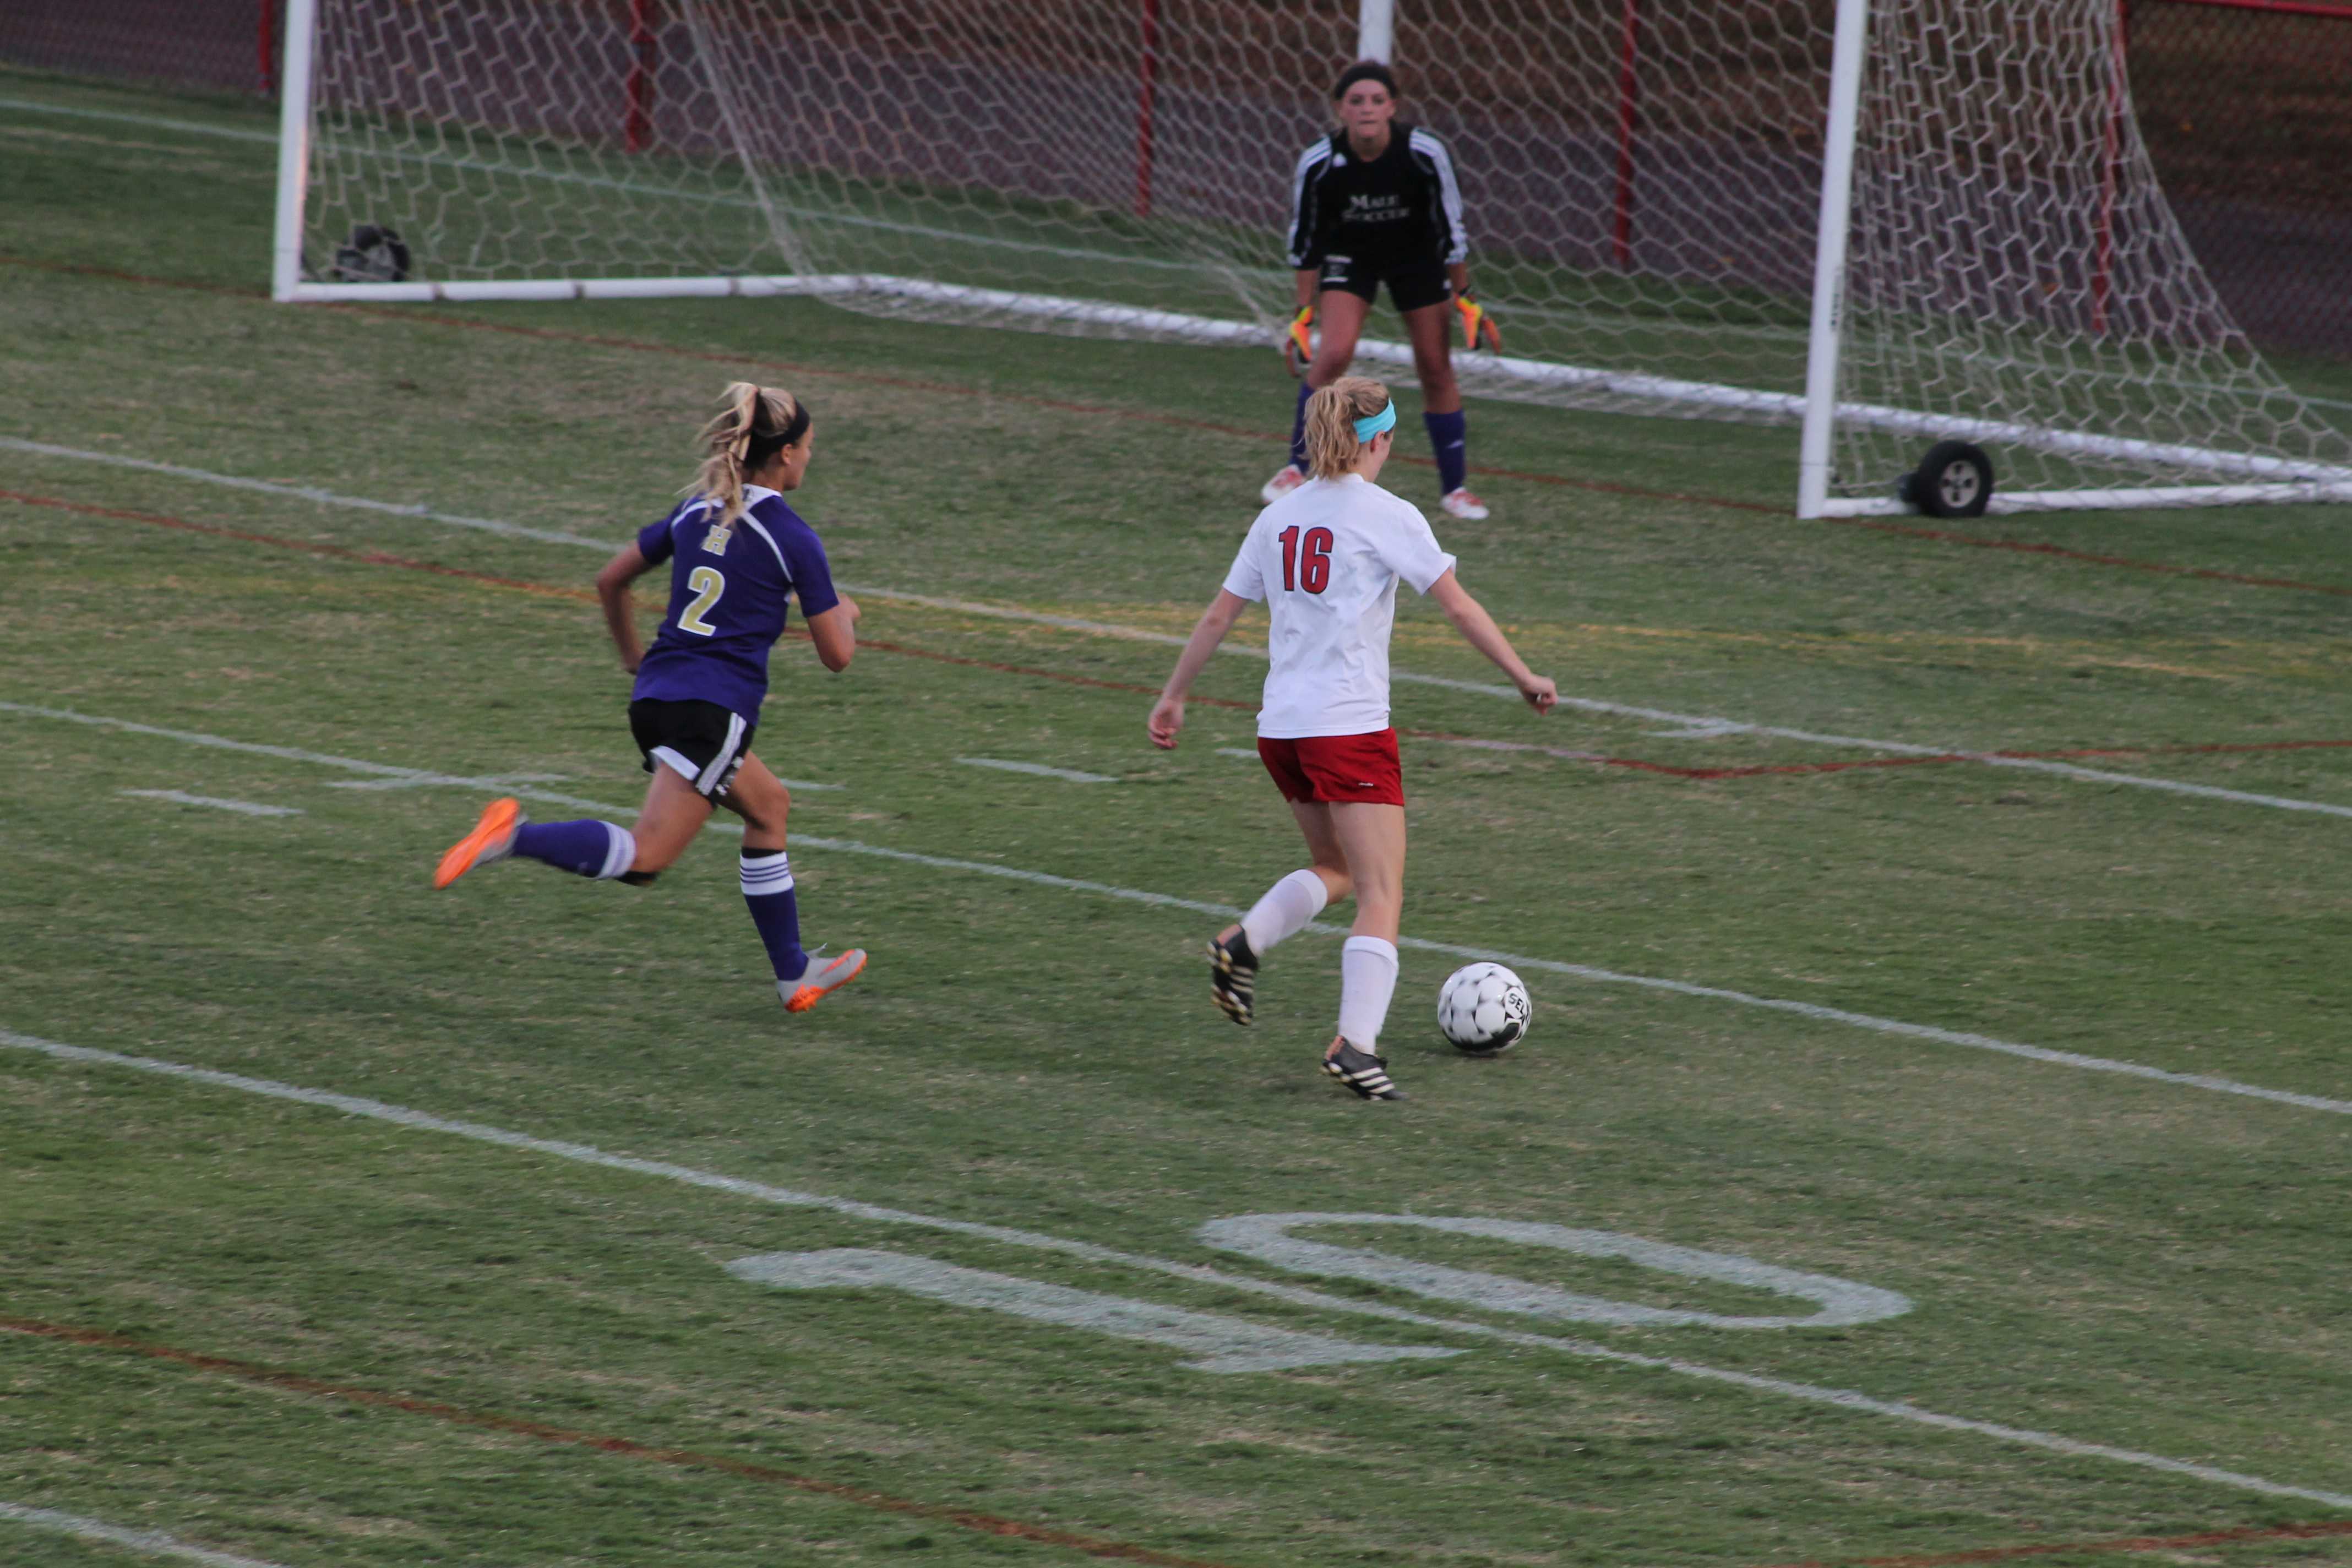 Madilyn Hord (11, #16) takes an open shot on goal. Photo by Shea Dobson  